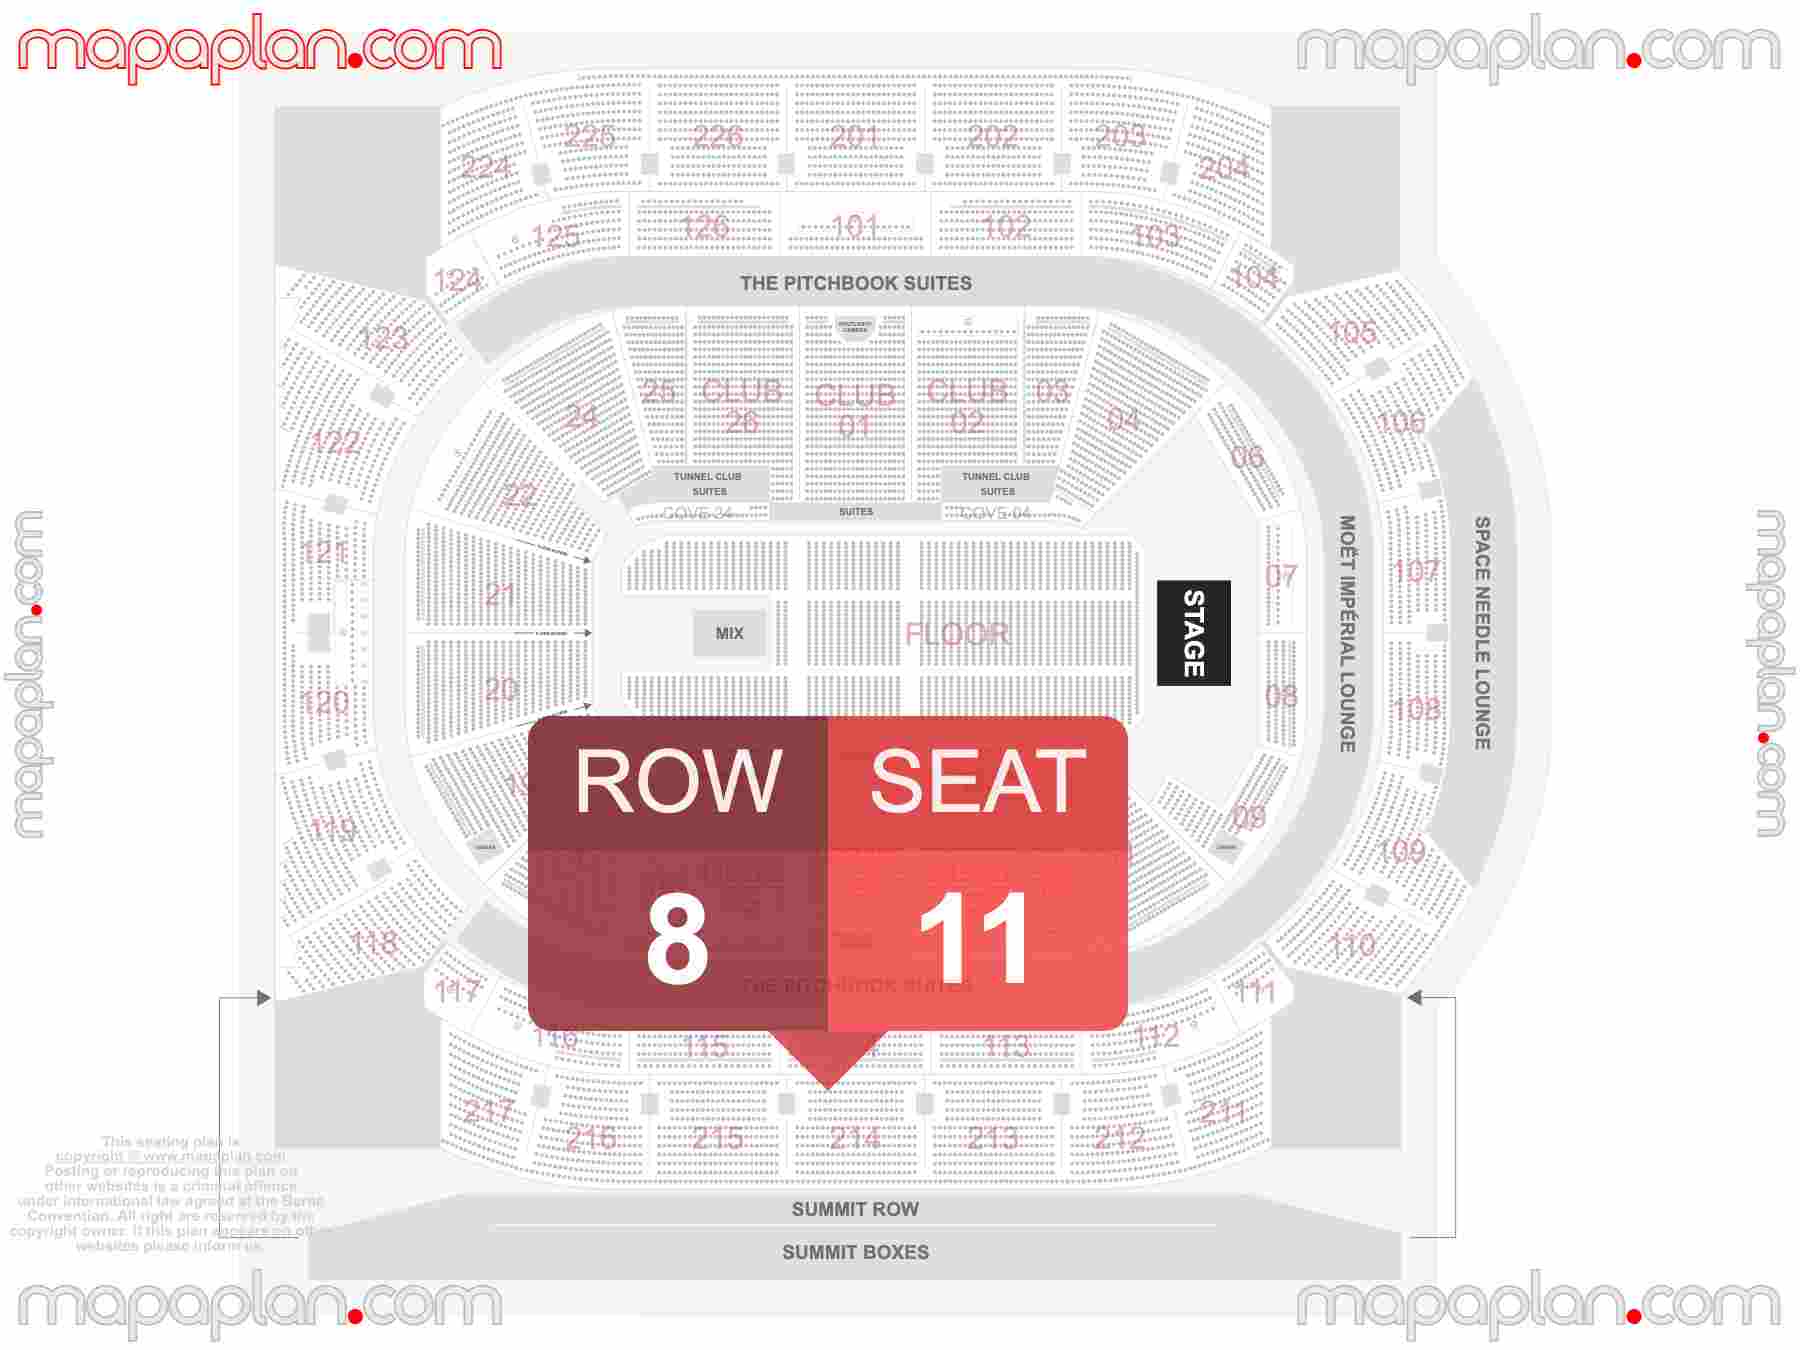 Seattle Climate Pledge Arena seating chart Concert detailed seat numbers and row numbering chart with interactive map plan layout